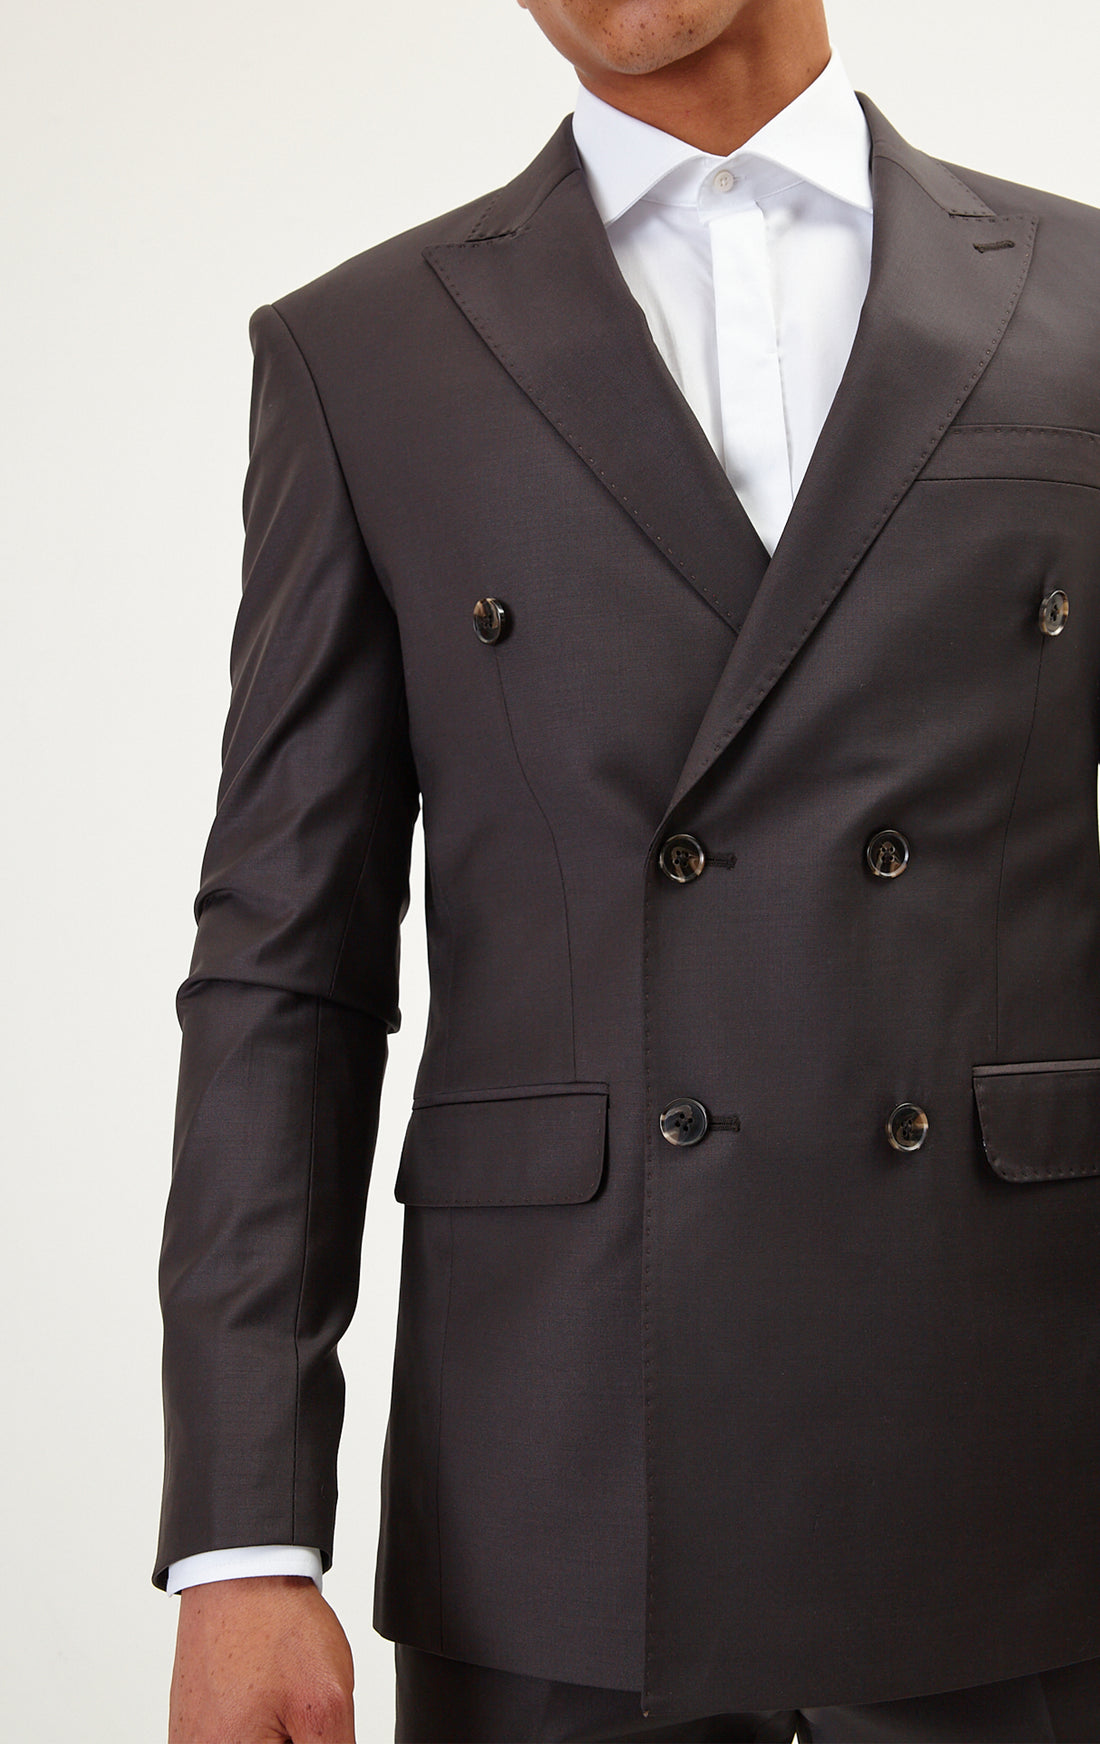 N° R206 Double Breasted Merino Wool Suit - Chocolate - Ron Tomson